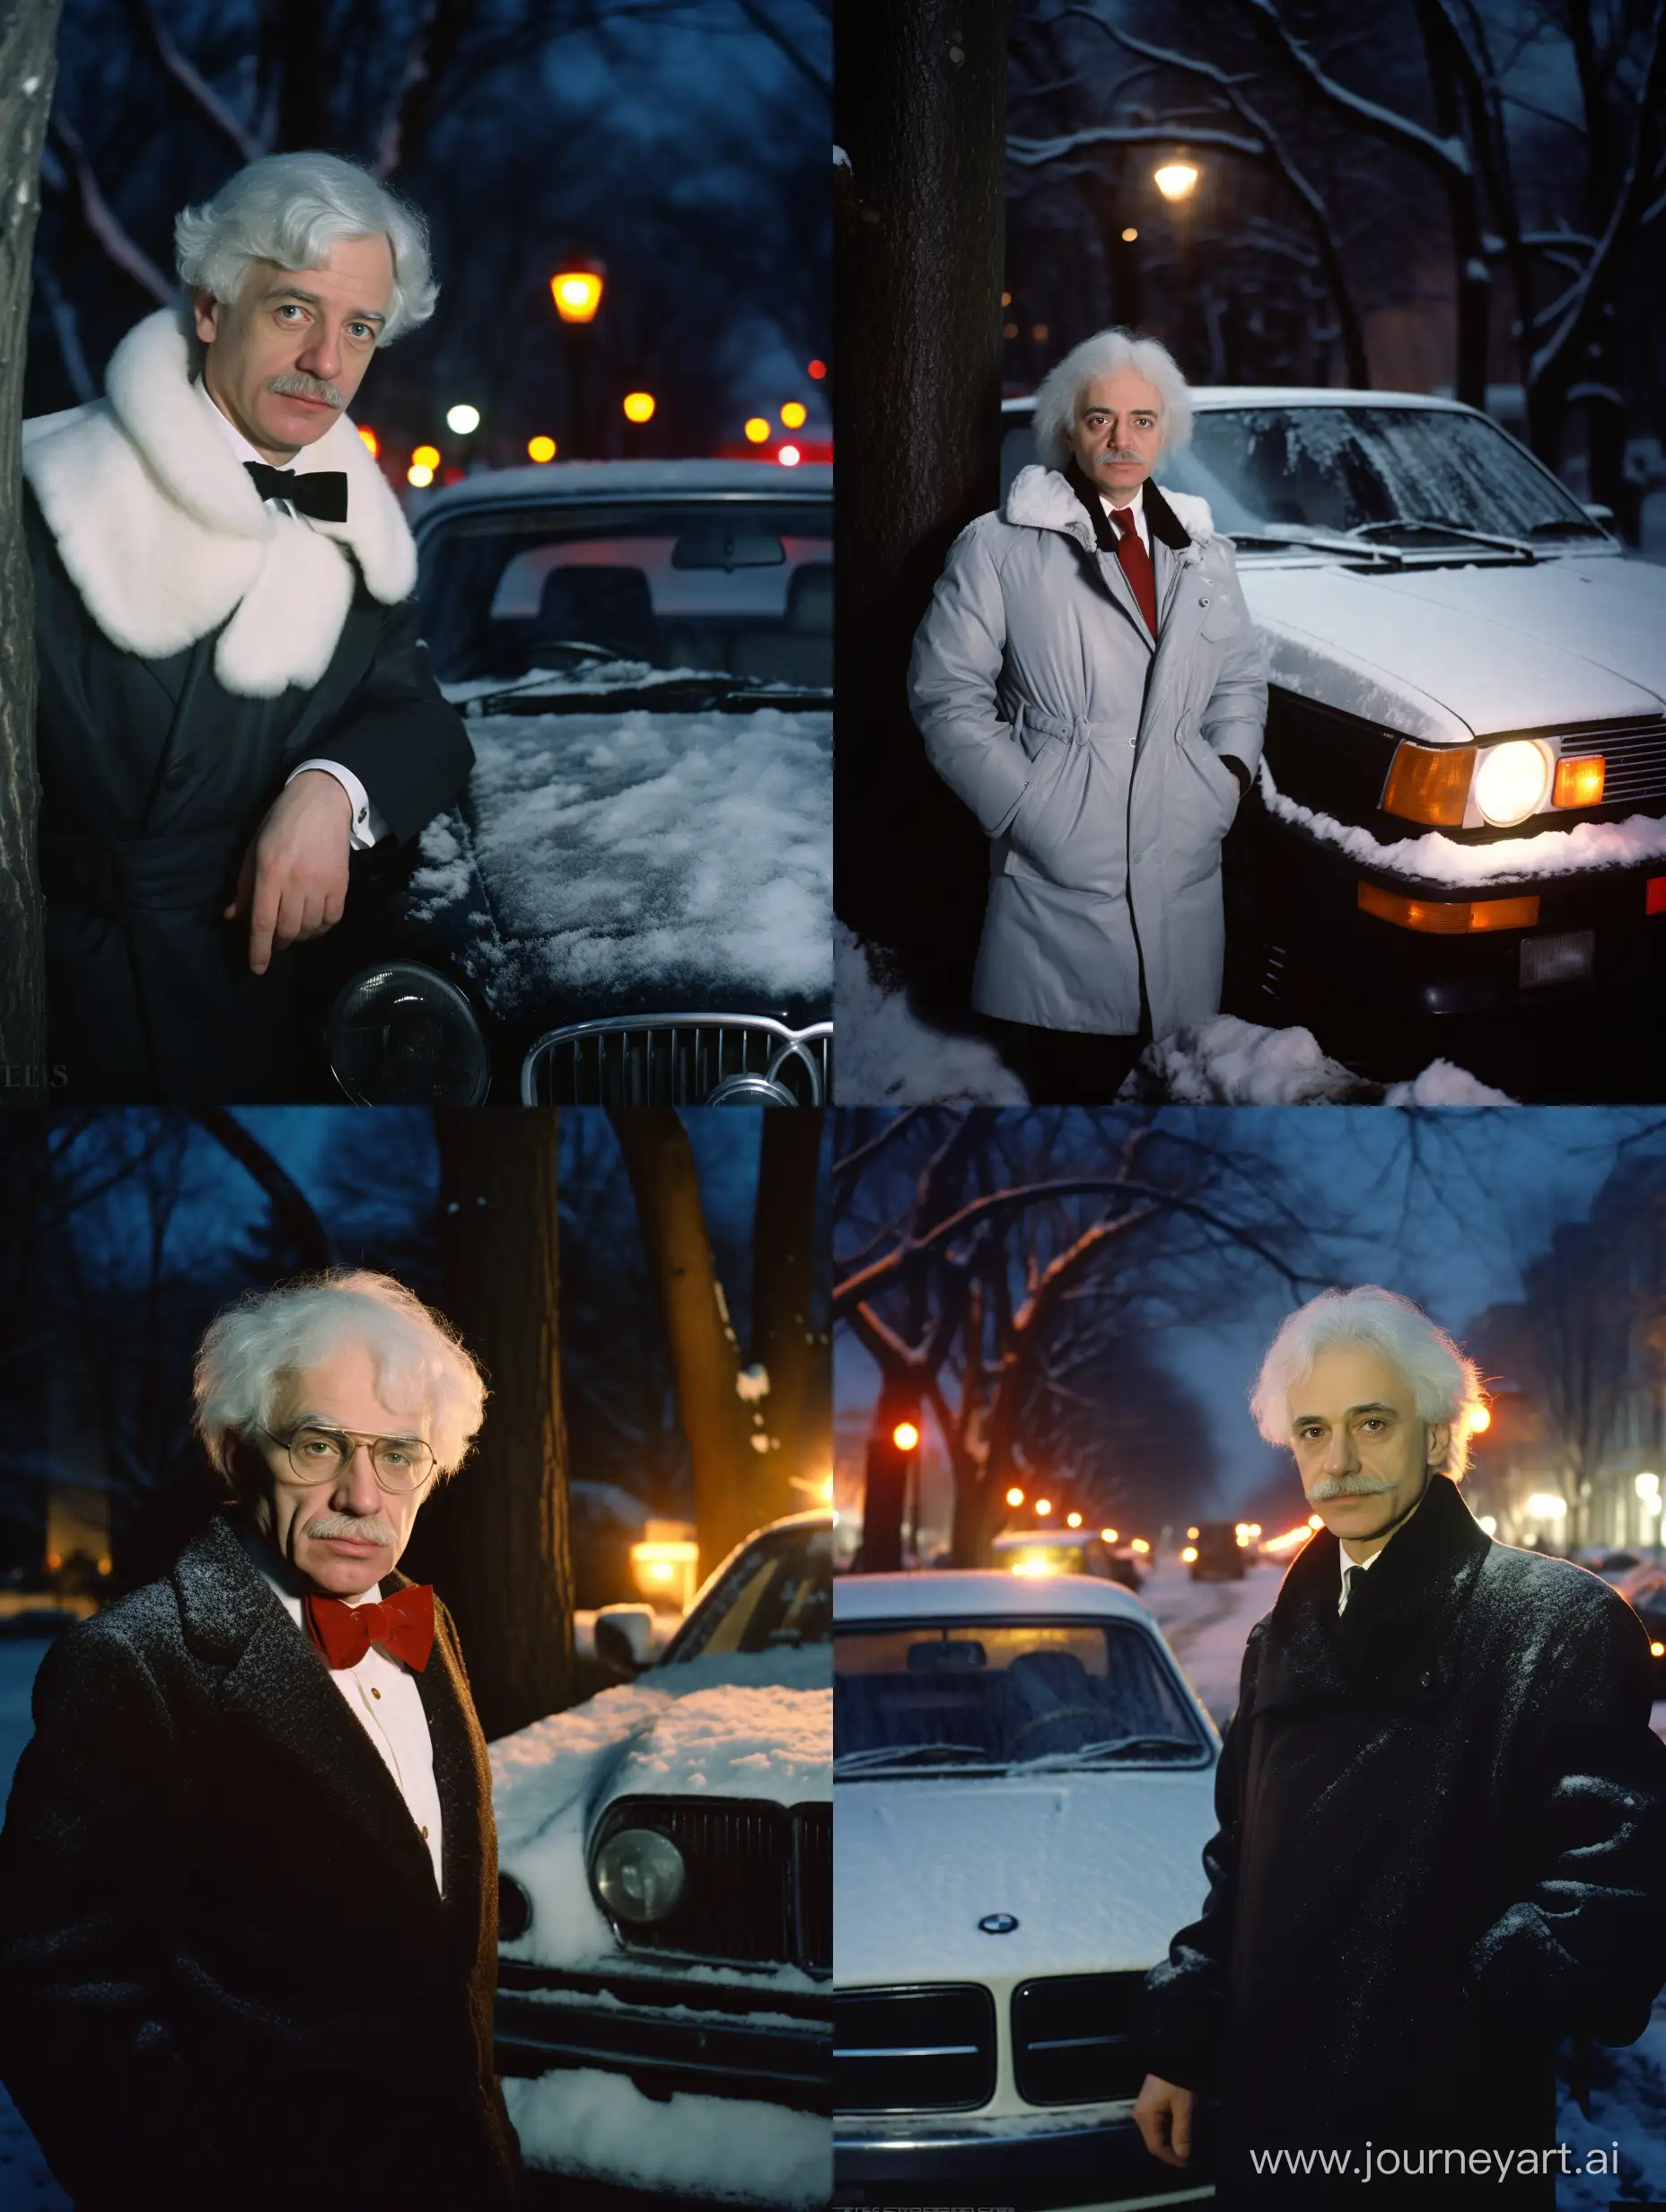 A АЛЬФРЕД ЭЙНШТЕЙН with БЕЛЫЕ hair, in the 80s and 90s of the USSR, stylishly dressed, standing next to a car BMW , it's snowing in winter, the lights are on in the evening, снято на Nikon AF-S NIKKOR 14-24mm f/2.Объектив 8G ED, Дневной свет, Фото на Ночном кладбище, Неоновый свет